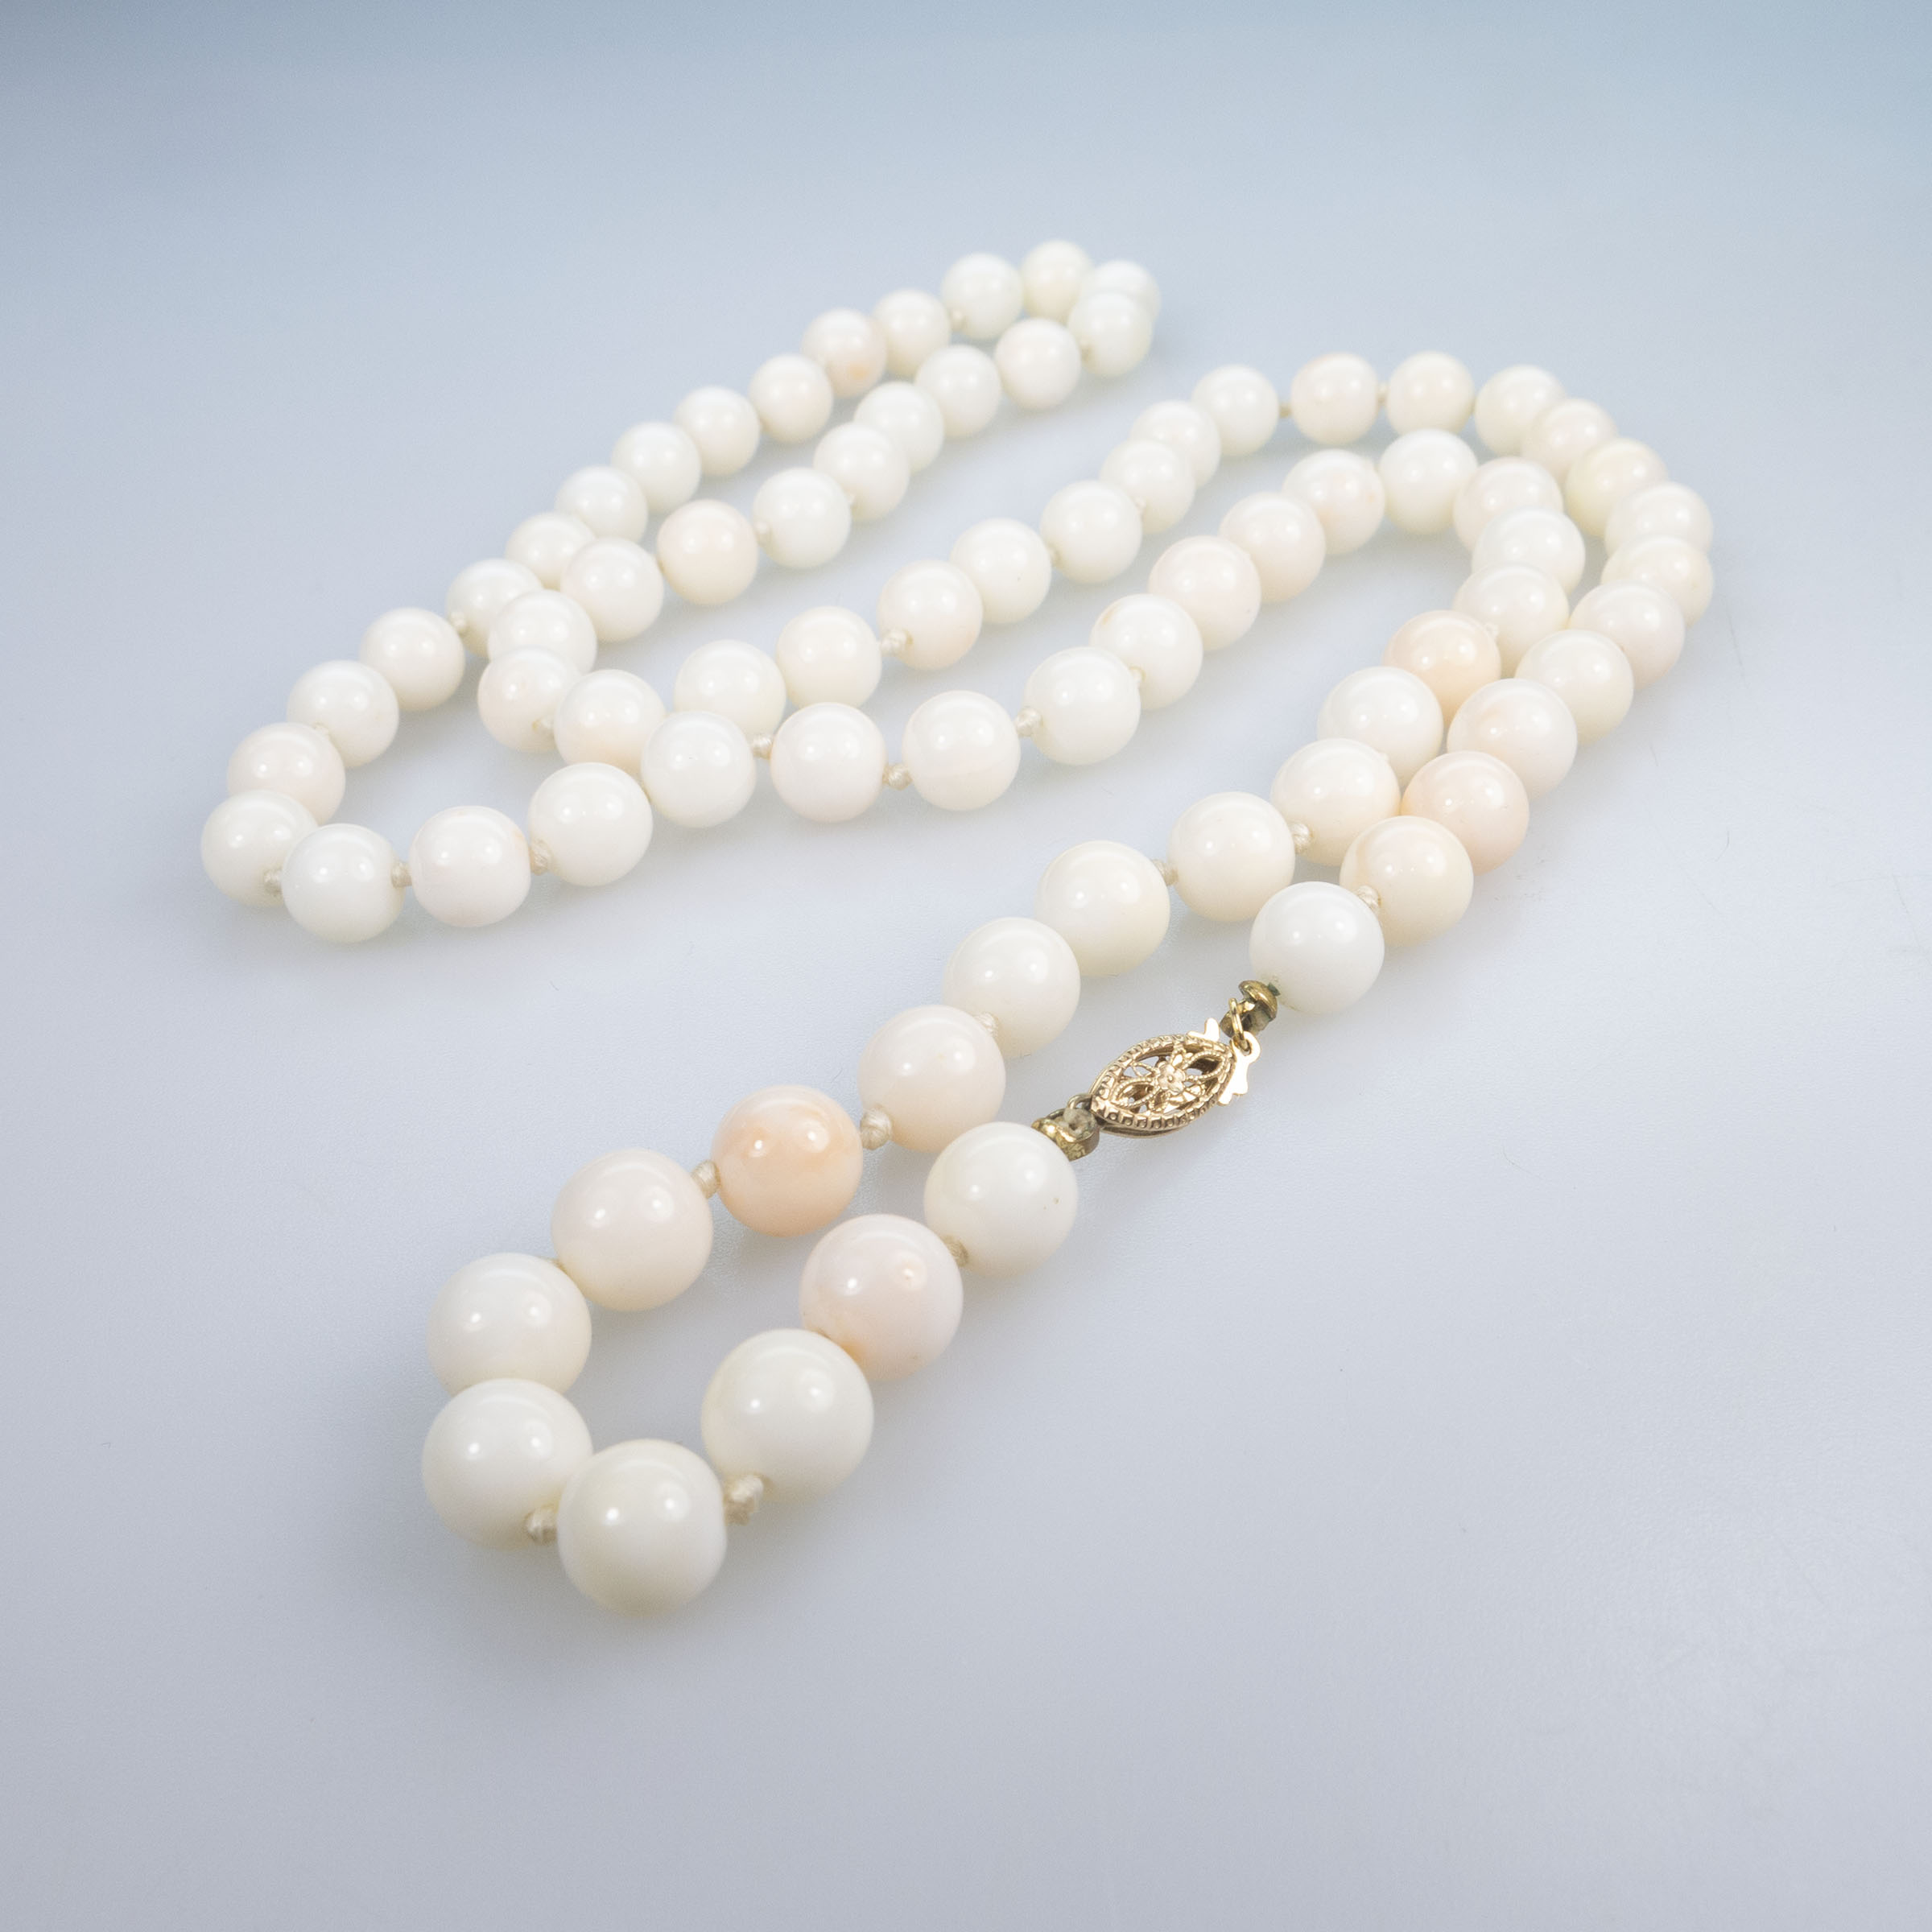 Single Strand Angel Skin Coral Bead Necklace